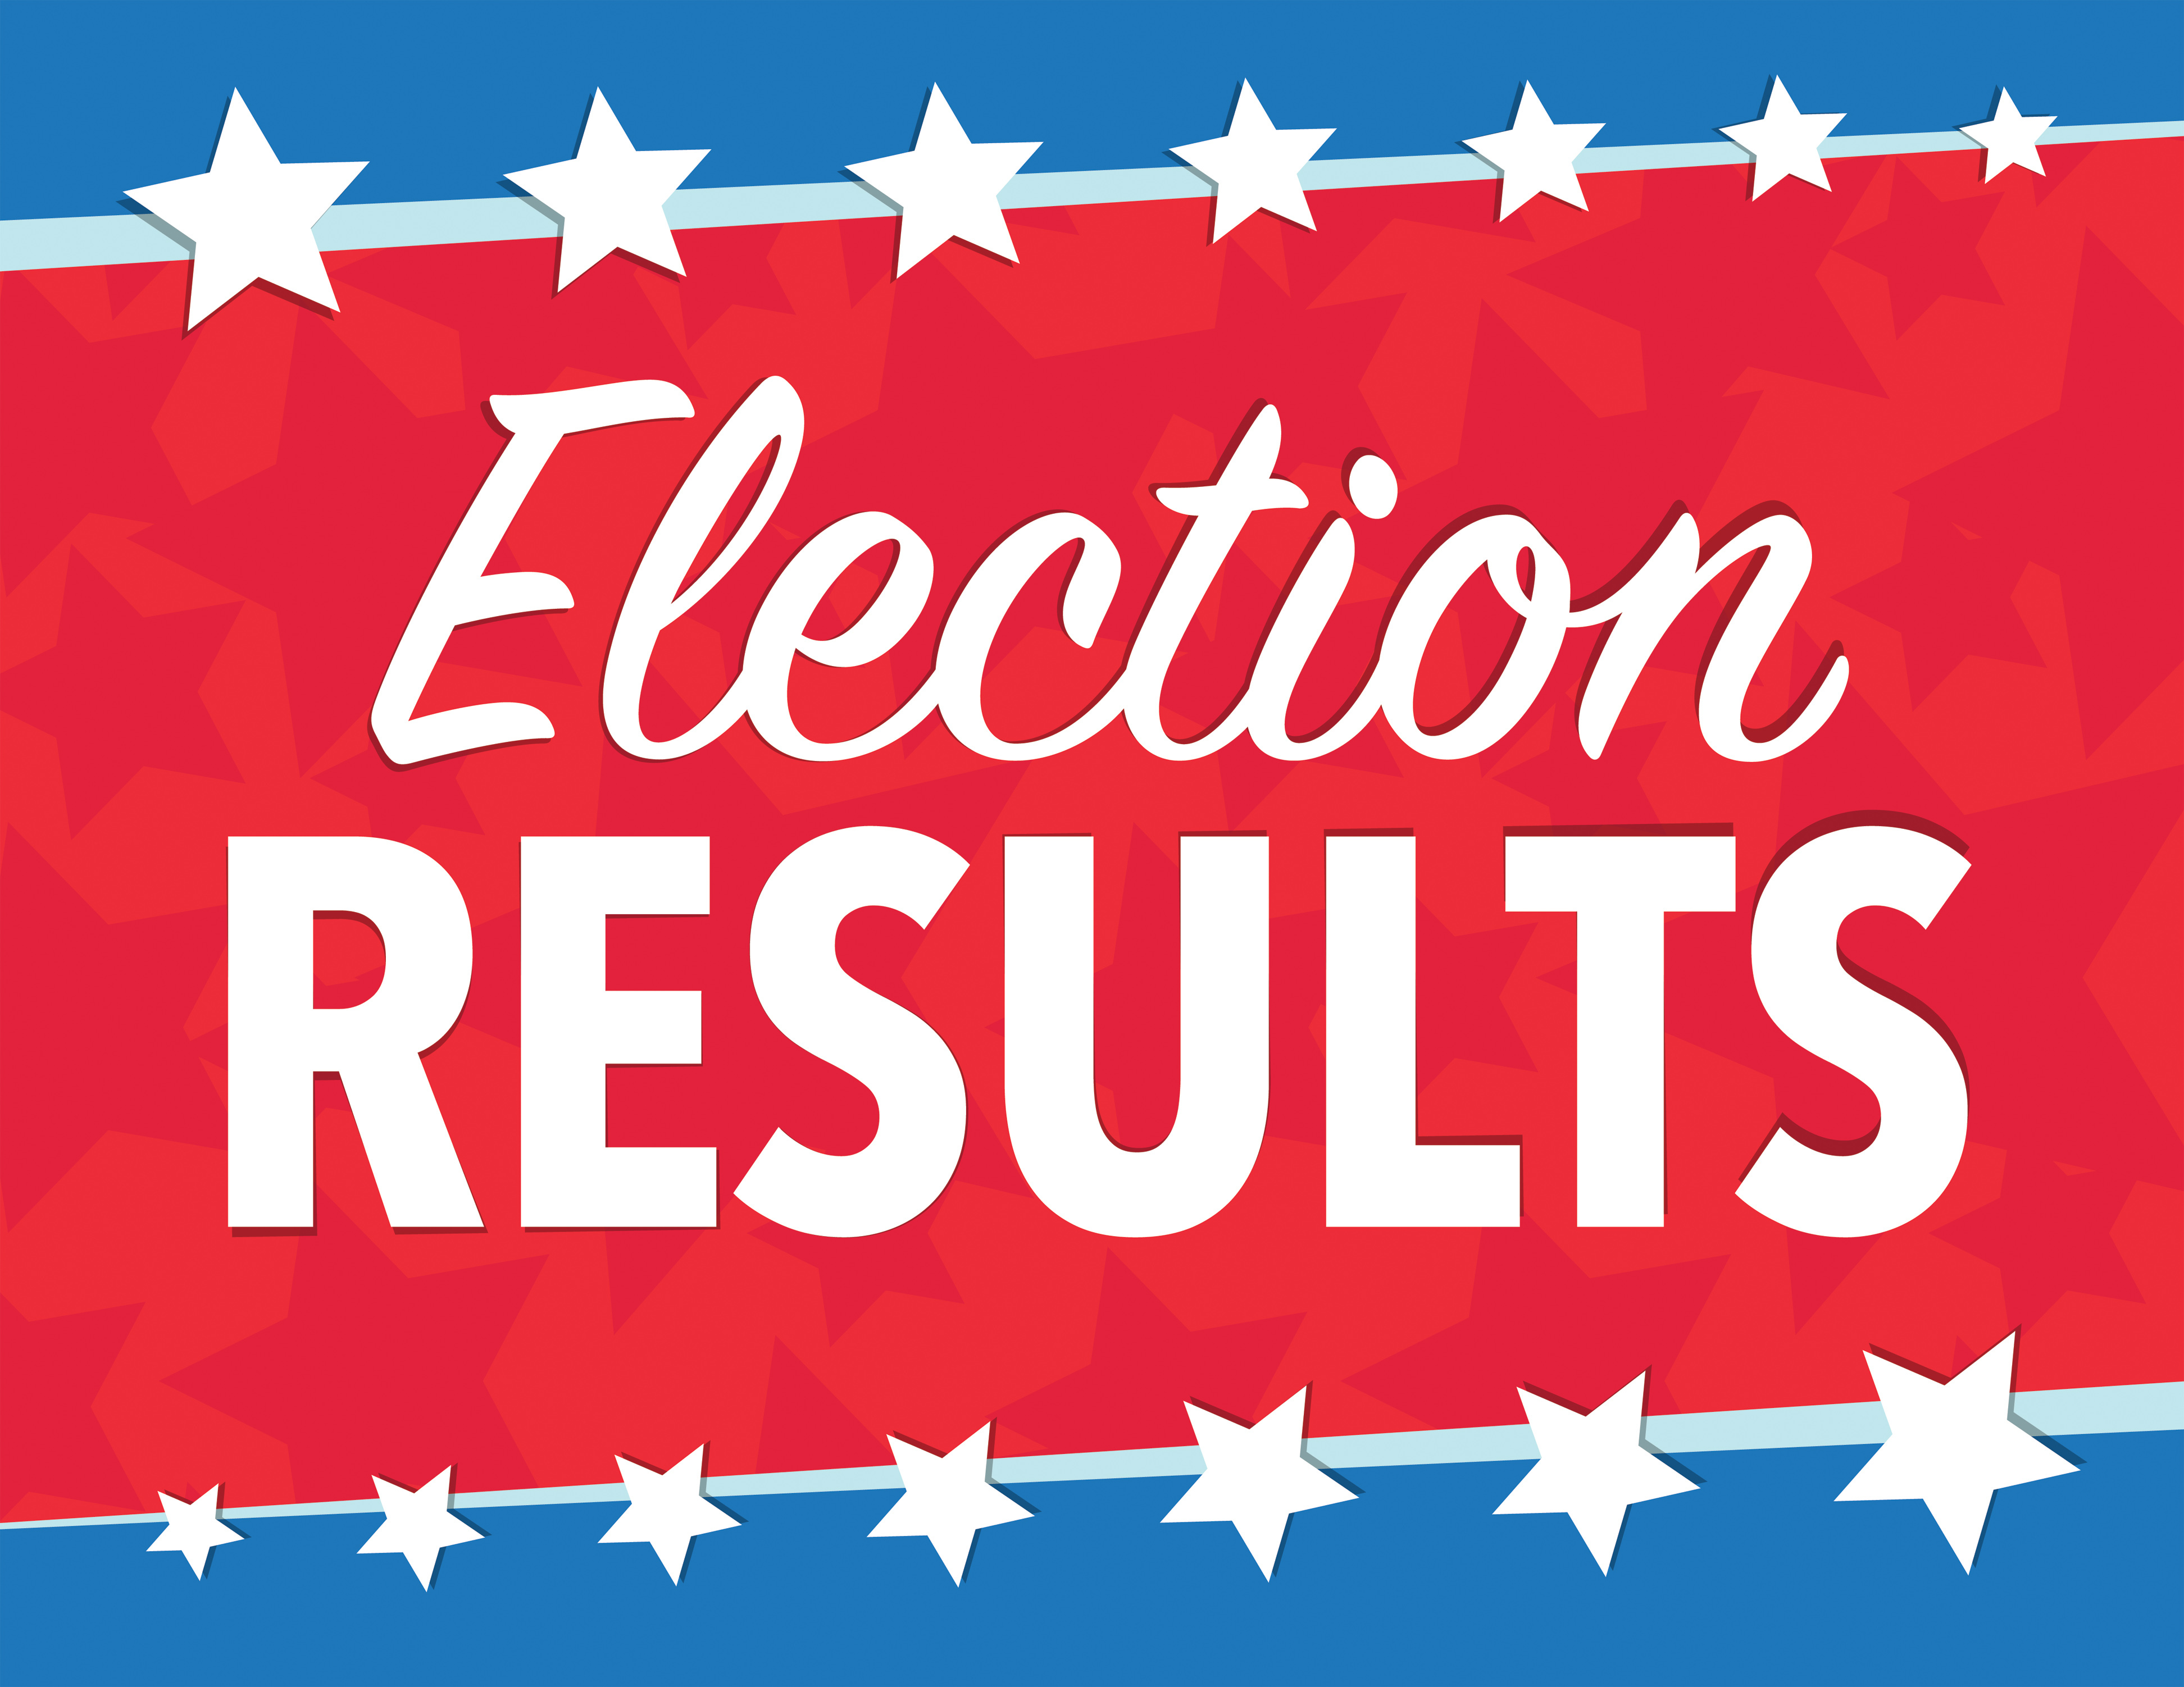 Hopkins County Election Results for July 14th Primary Run-Off